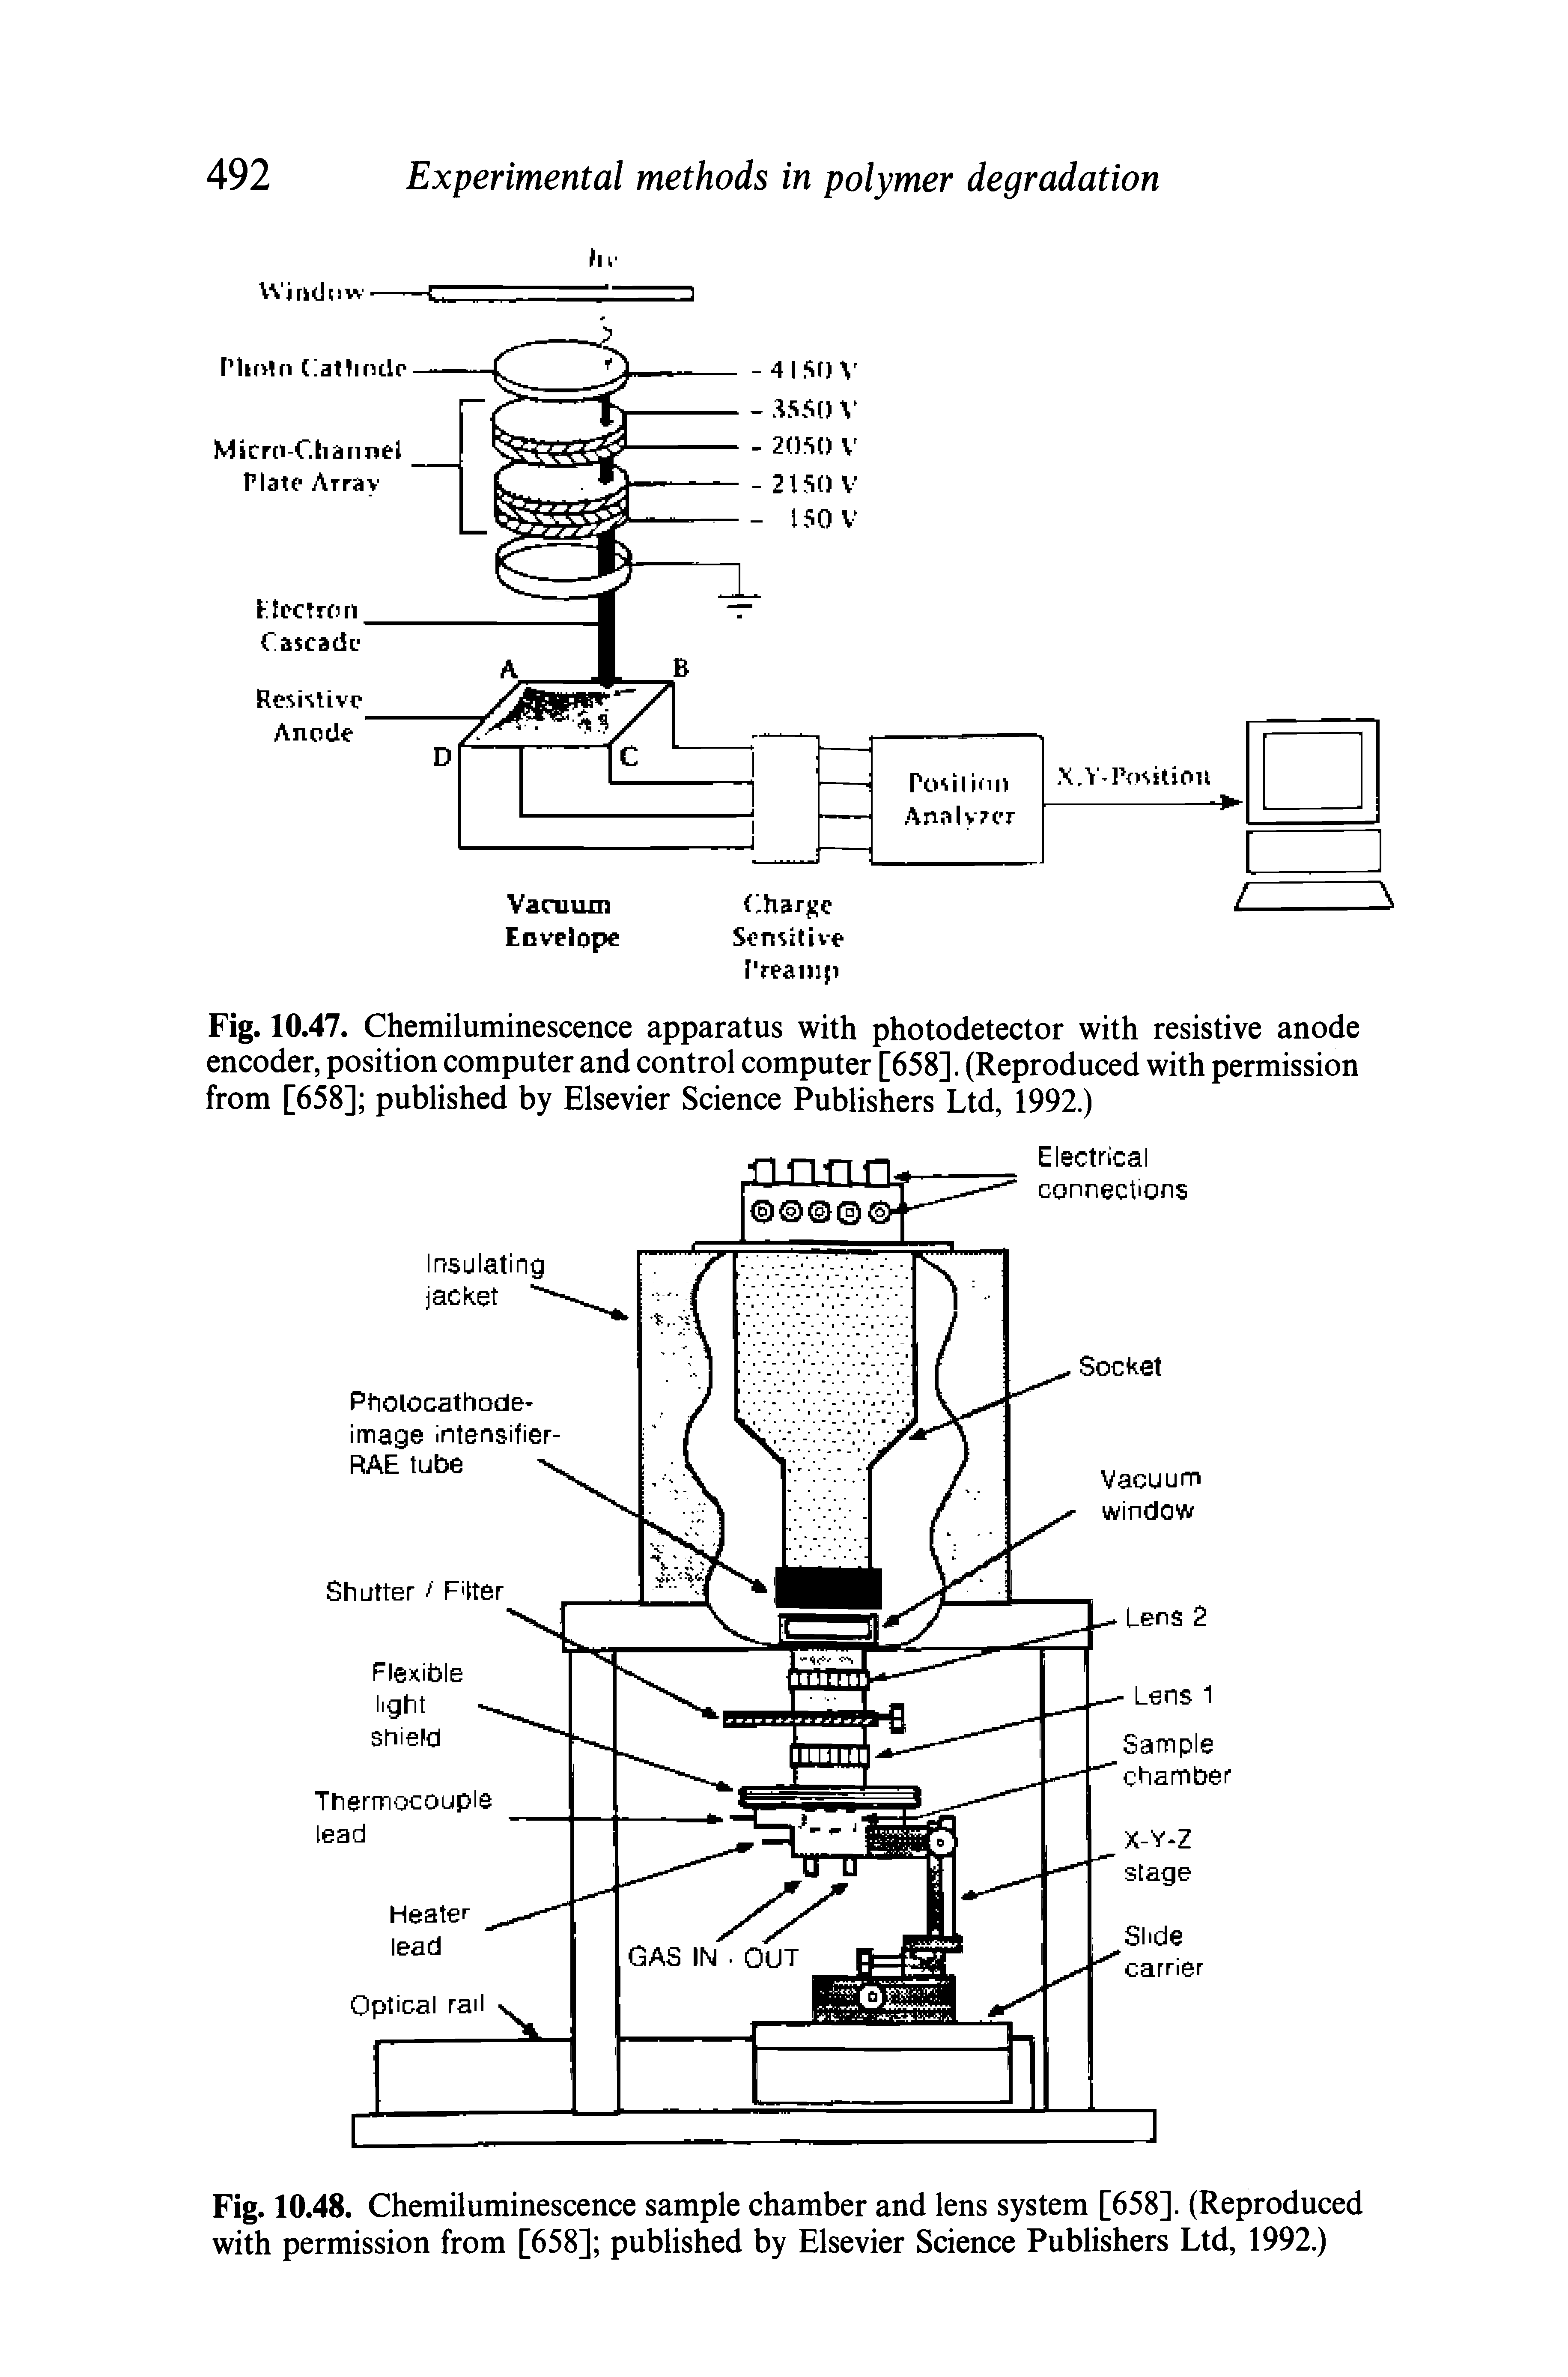 Fig. 10.47. Chemiluminescence apparatus with photodetector with resistive anode encoder, position computer and control computer [658]. (Reproduced with permission from [658] published by Elsevier Science Publishers Ltd, 1992.)...